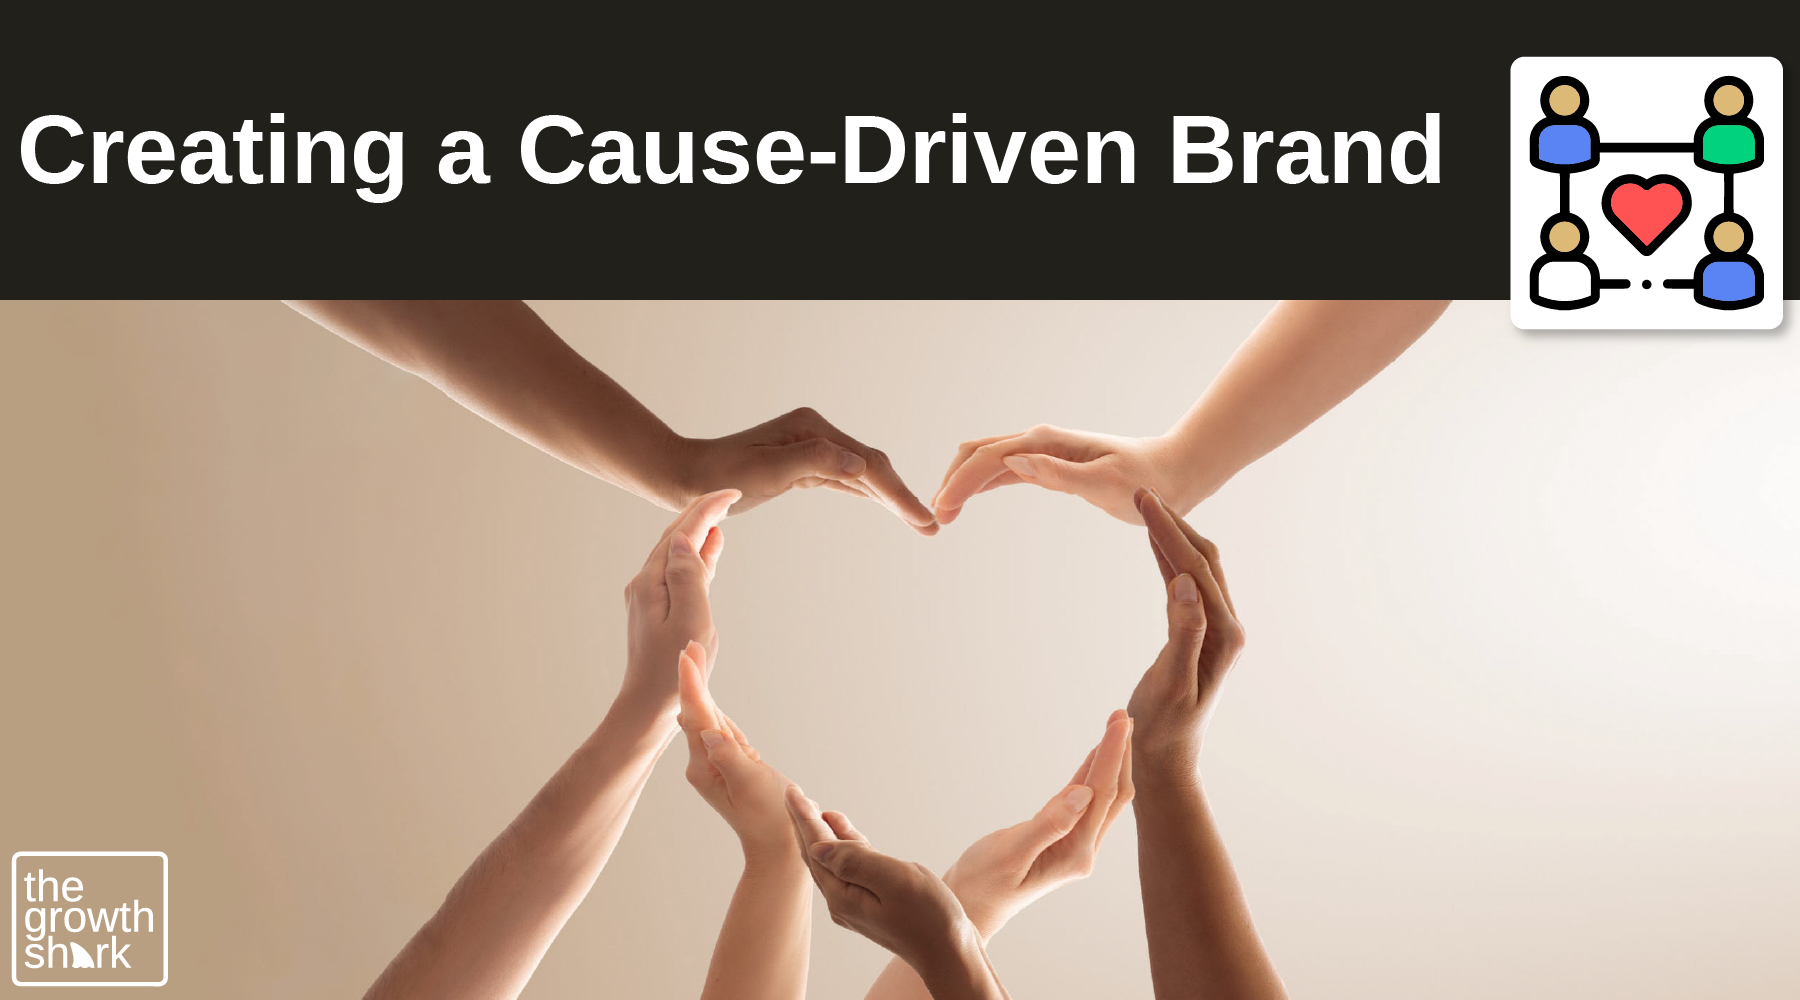 Practicing what you preach is vital to creating a purpose-led, cause-driven brand and business